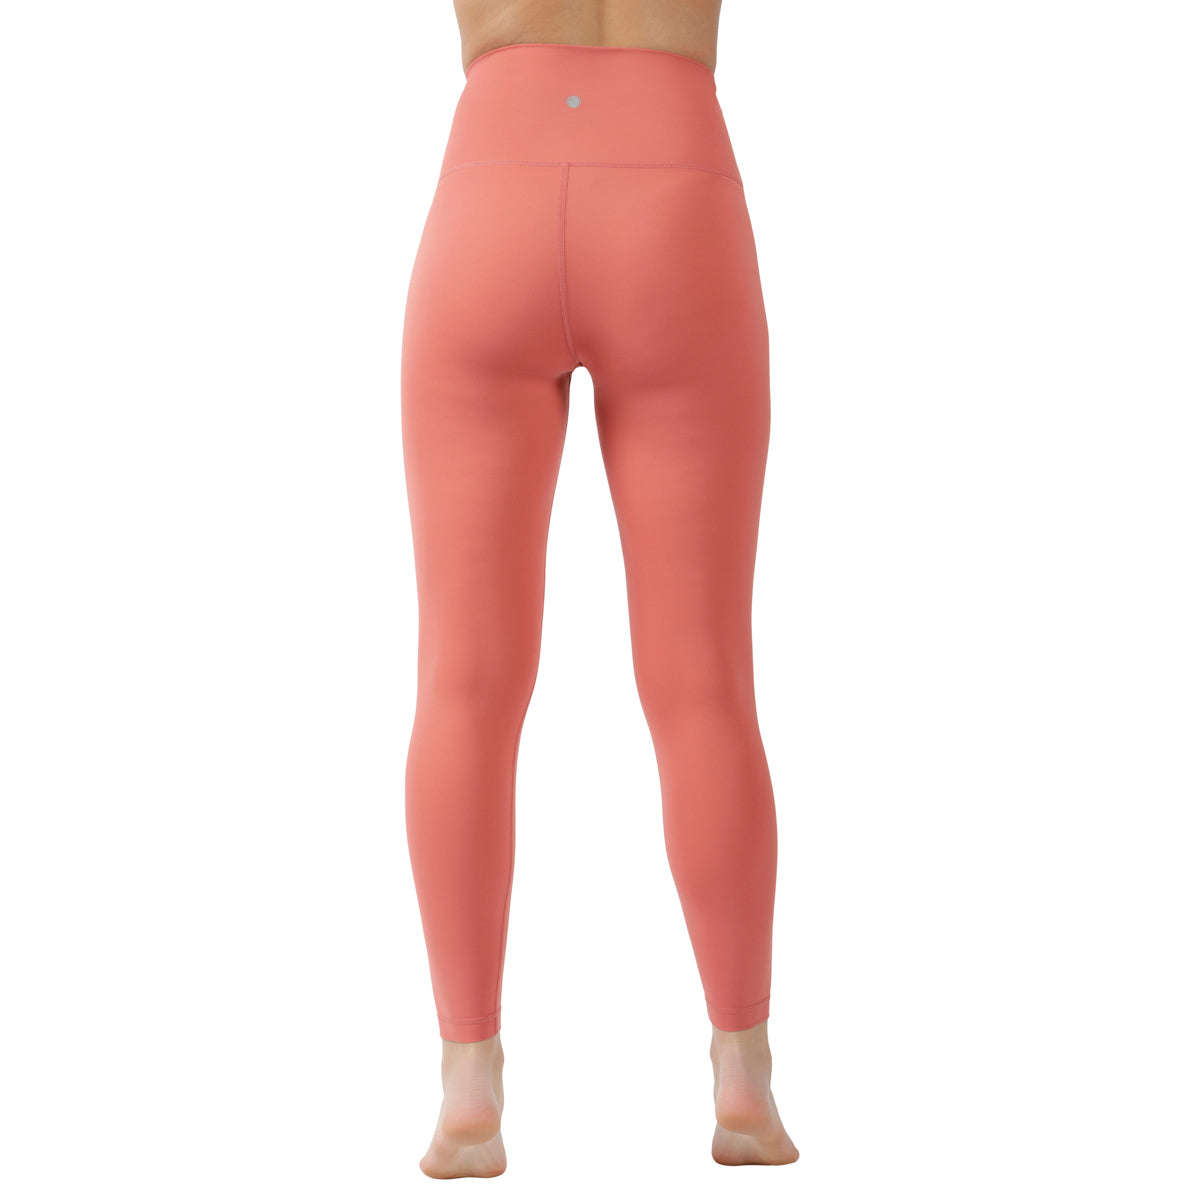 Yogalicious by Reflex Women's Lux Super High Rise Ankle Leggings